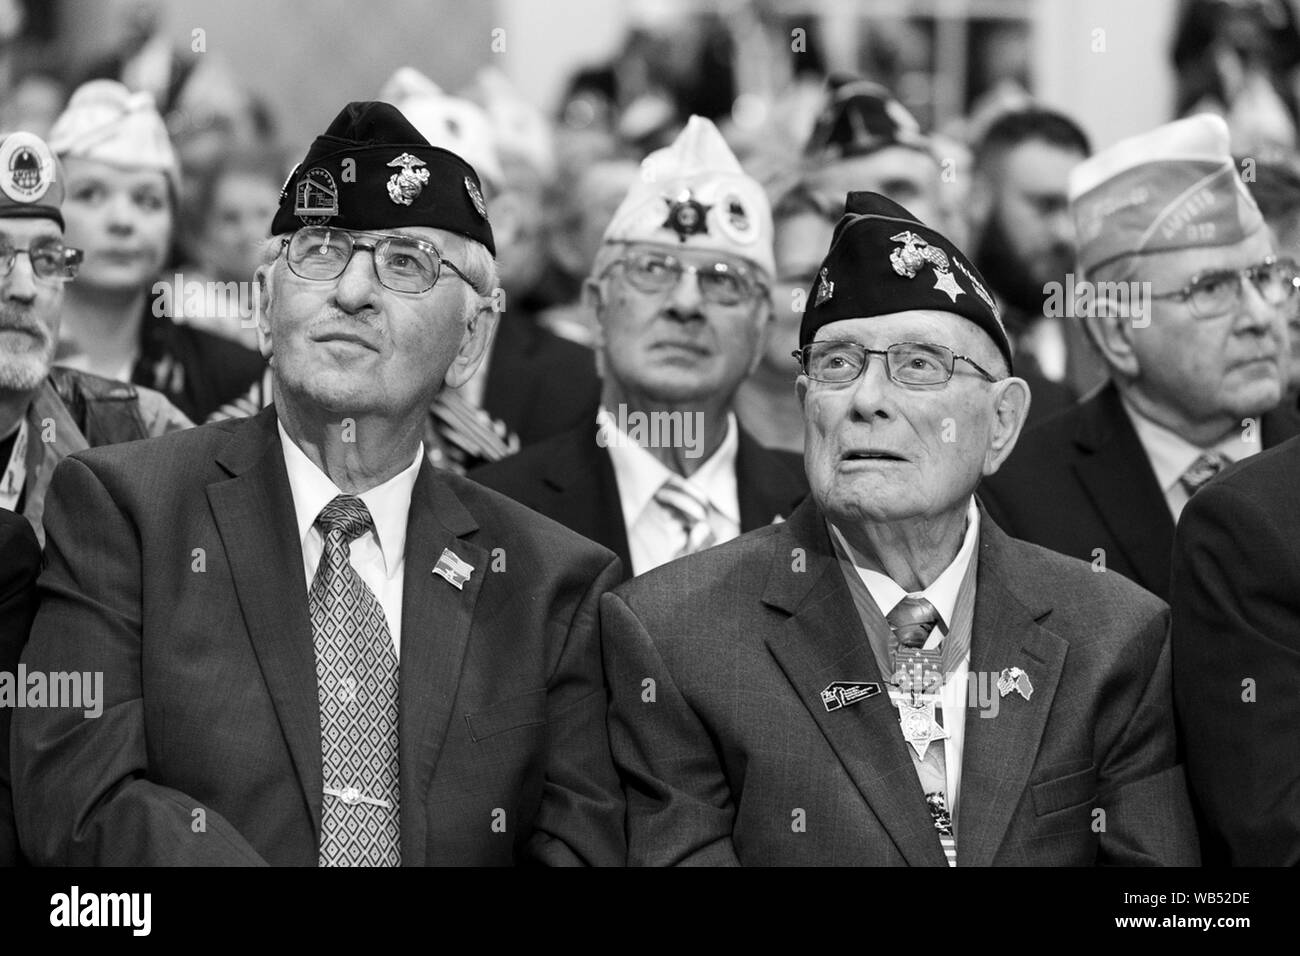 Louisville, United States Of America. 21st Aug, 2019. Veterans listen as President Donald J. Trump delivers remarks at the American Veterans (AMVETS) 75th National Convention prior to signing a Presidential Memorandum 'Discharging the Federal Student Loan Debt of Totally and Permanently Disabled Veterans' Wednesday, Aug. 21, 2019, at The Galt House Hotel in Louisville, Ky People: President Donald Trump Credit: Storms Media Group/Alamy Live News Stock Photo